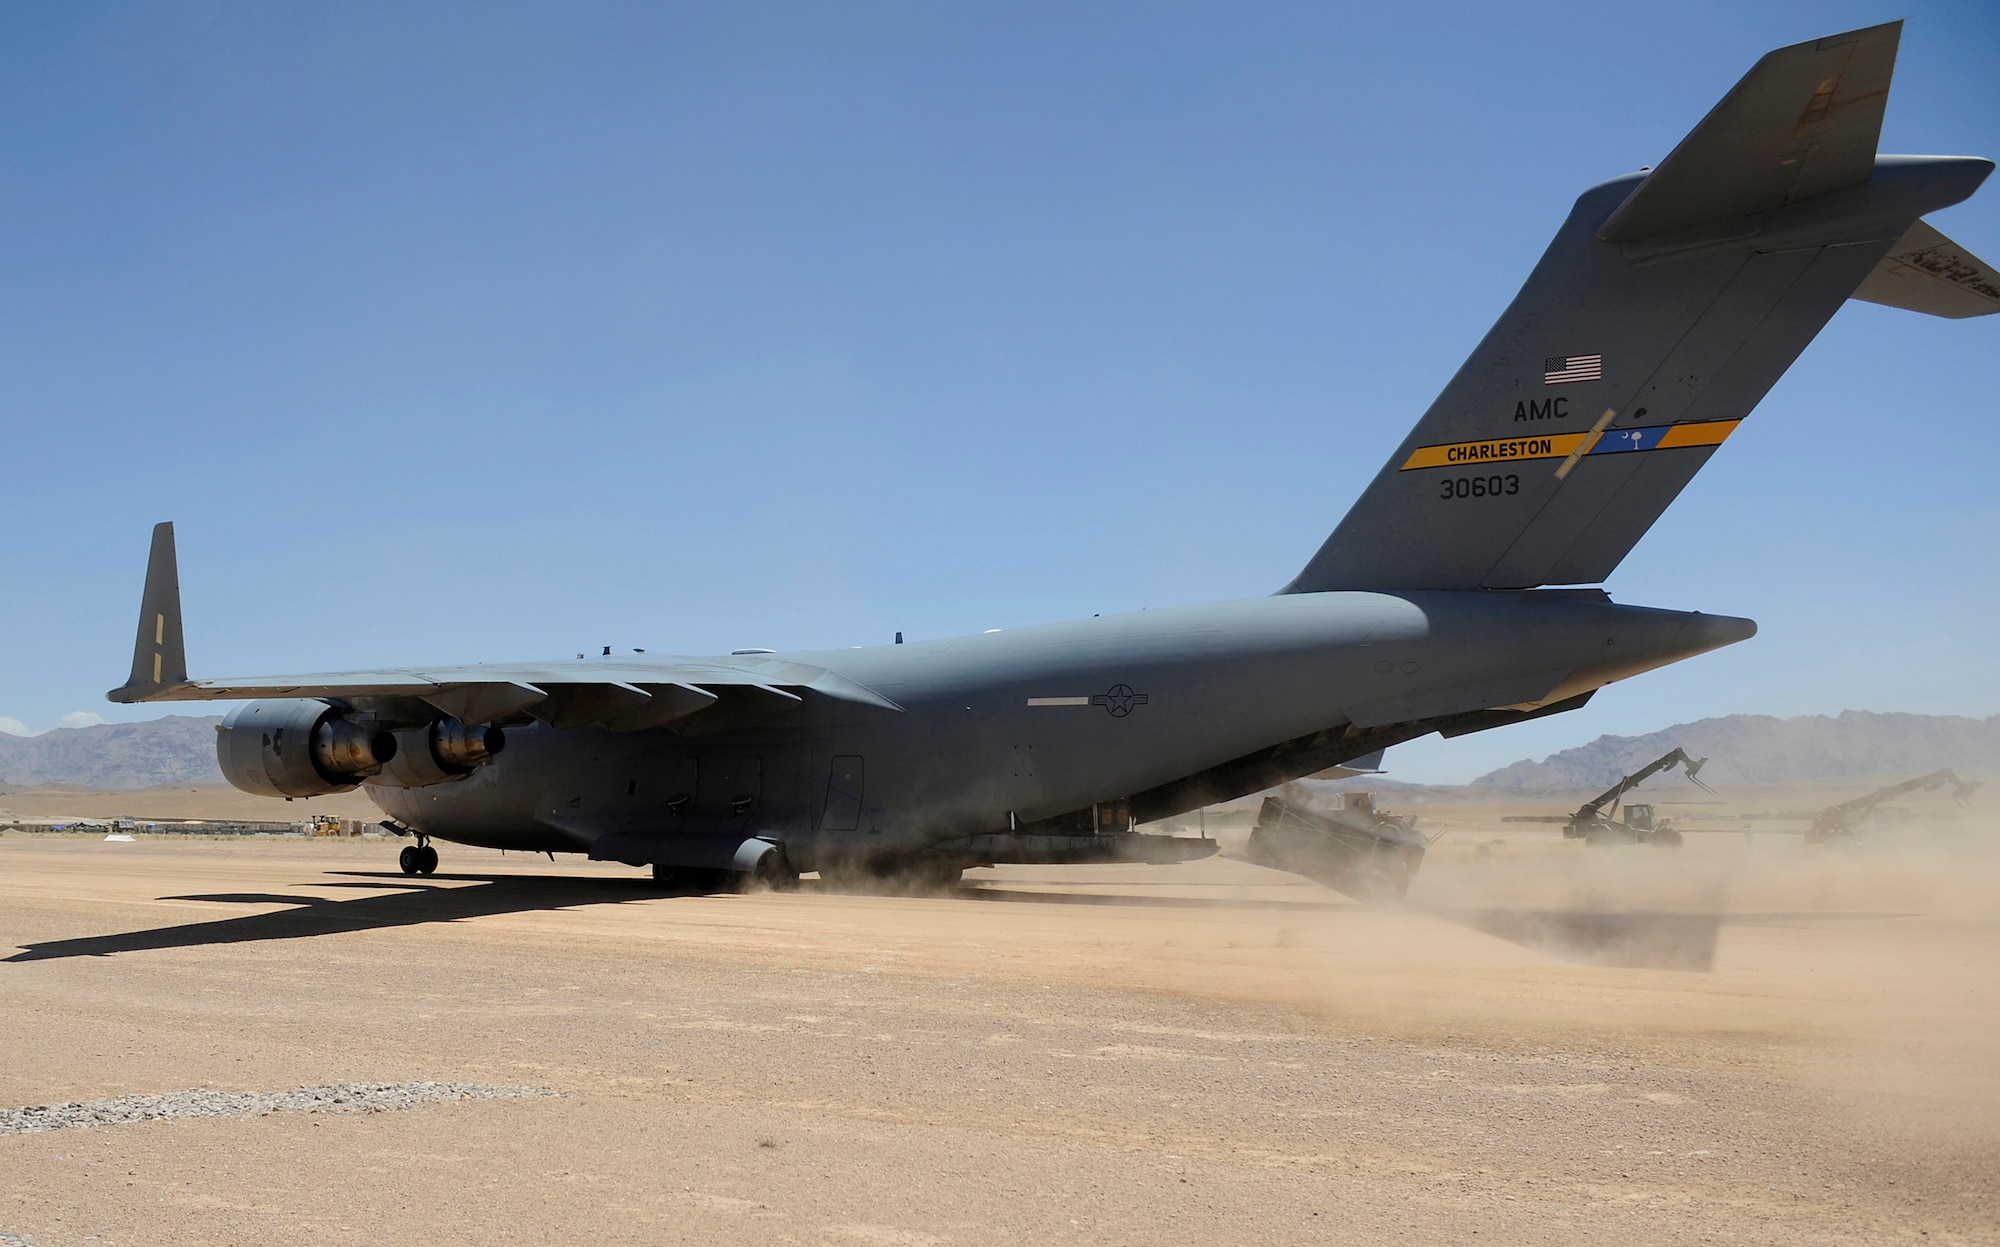 A pallet is combat offloaded from a C-17 Globemaster III June 20, at Tarin Kowt Airfield, Afghanistan. Members of the 816th Expeditionary Airlift Squadron conducted a combat offload. (U.S. Air Force photo/Staff Sgt. Shawn Weismiller)